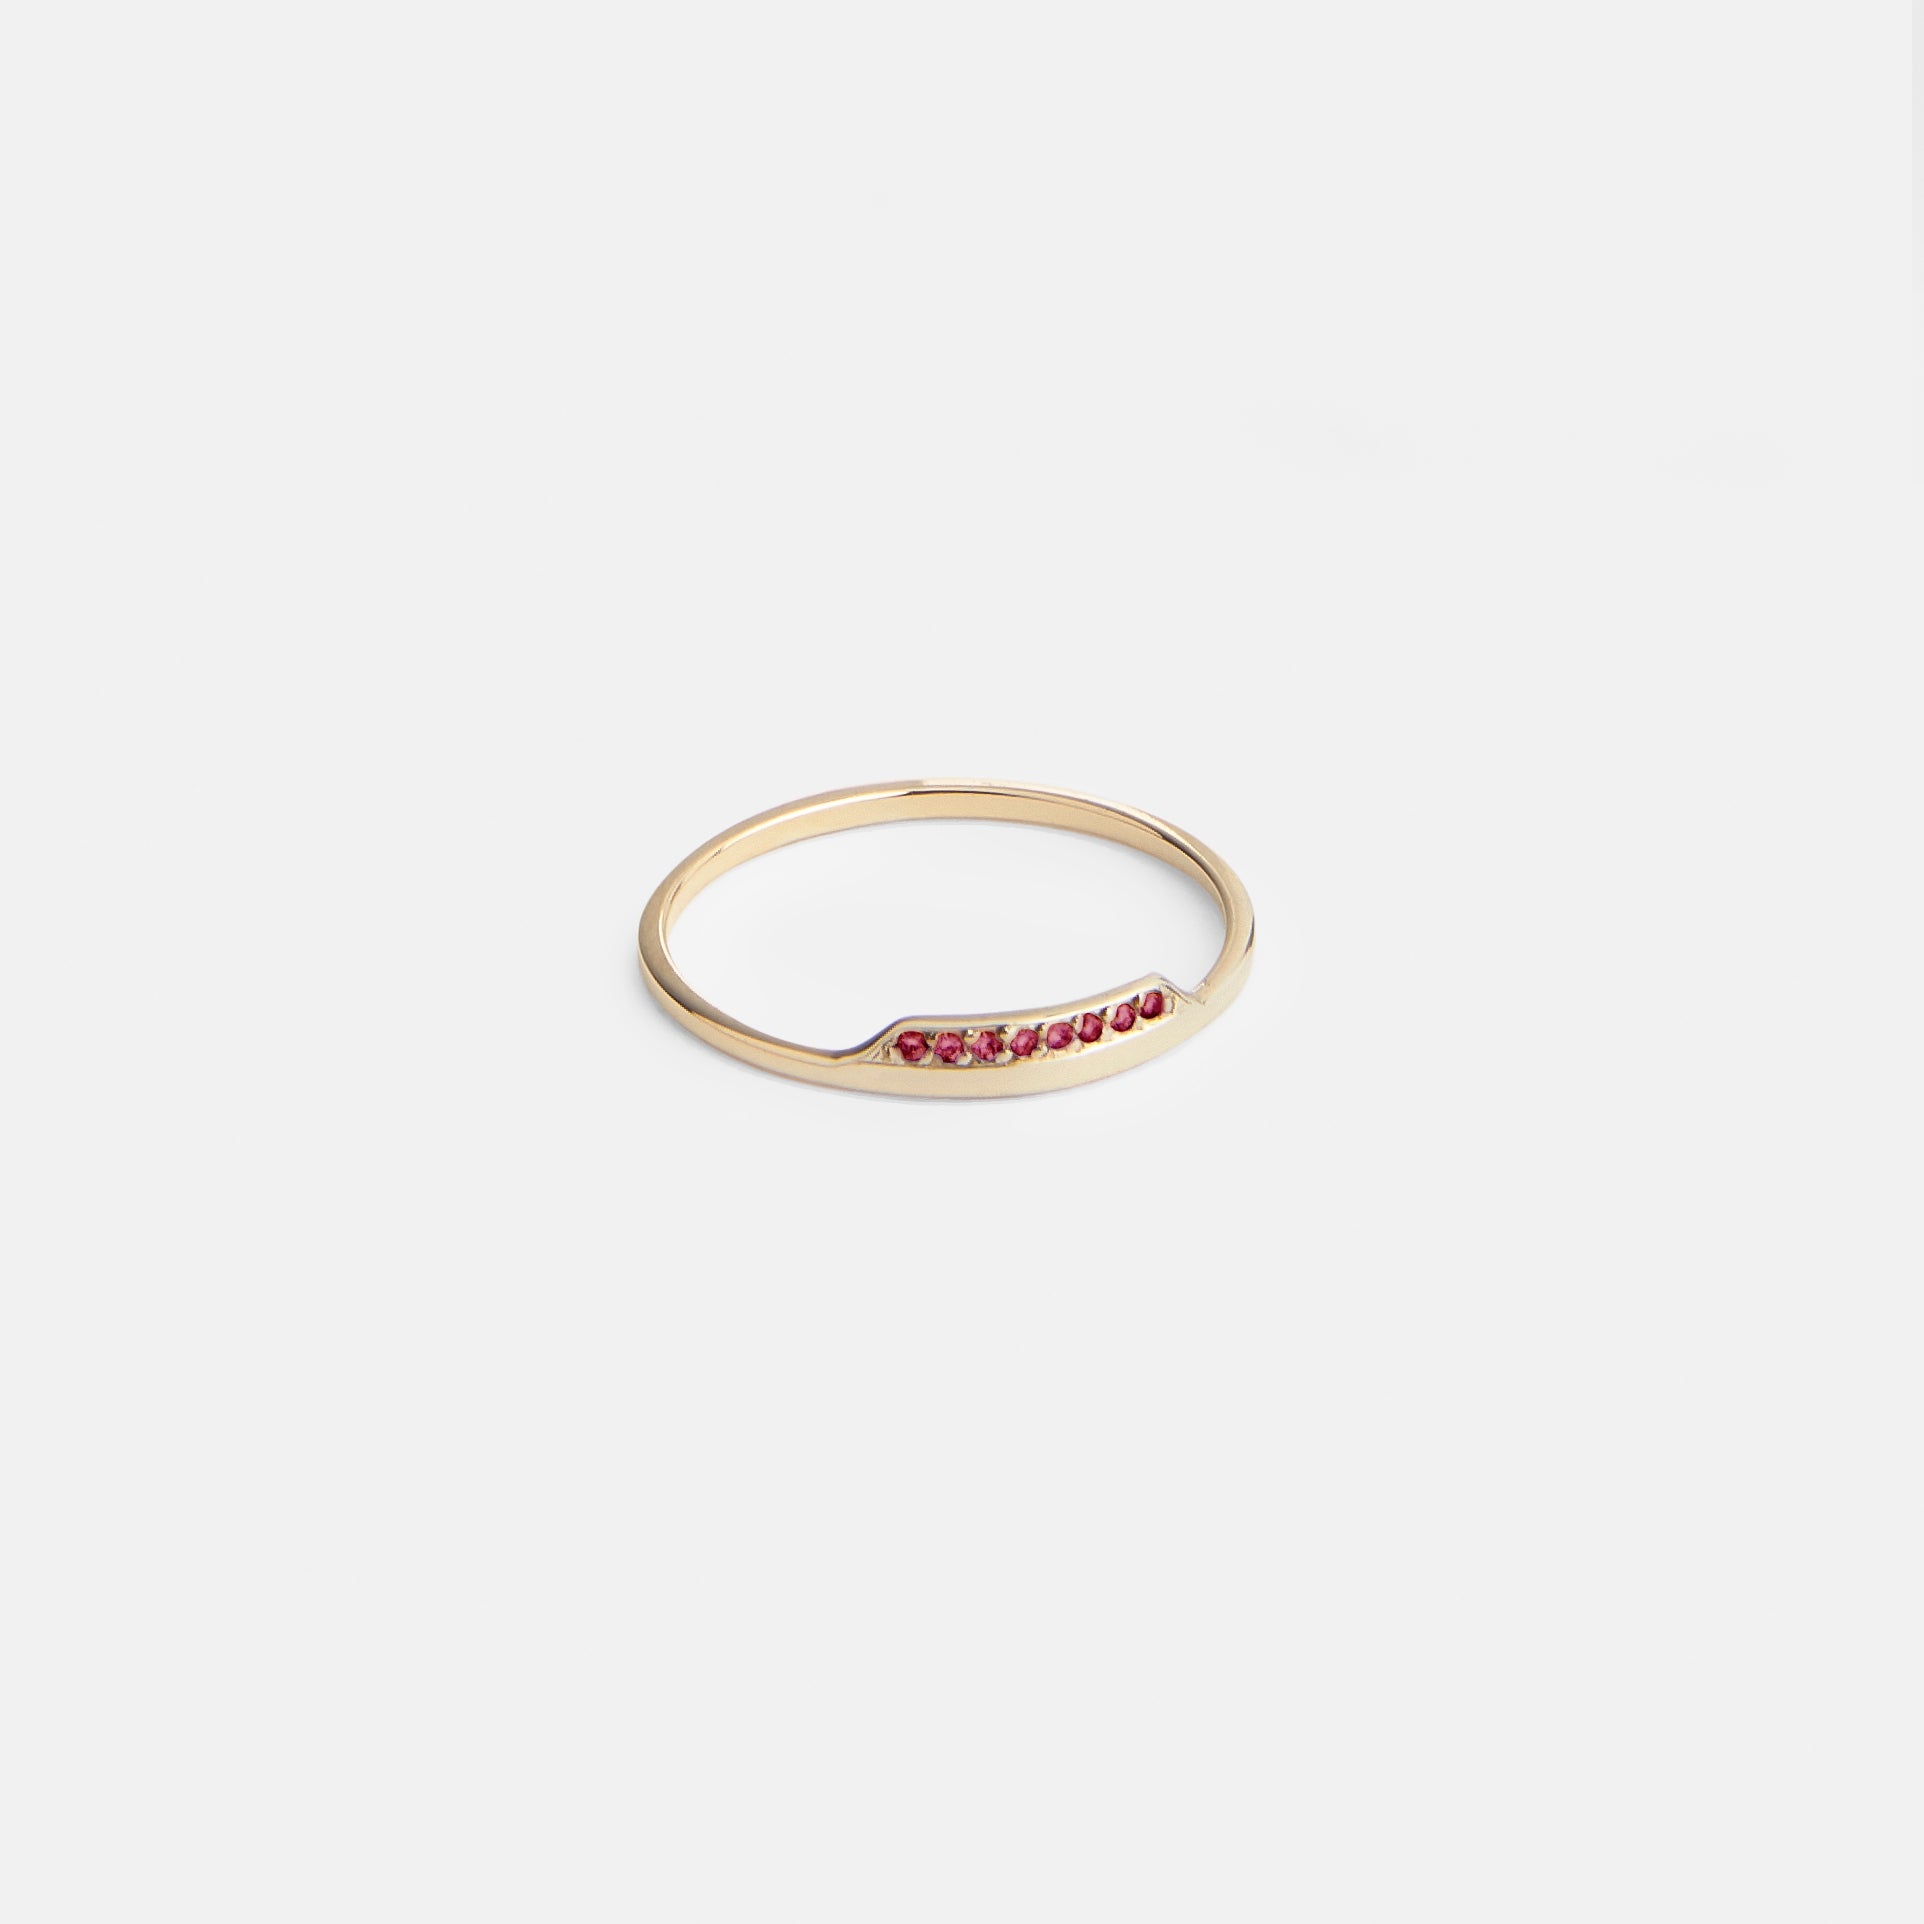 Salo Stackable Ring in 14k Gold set with Rubies By SHW Fine Jewelry NYC